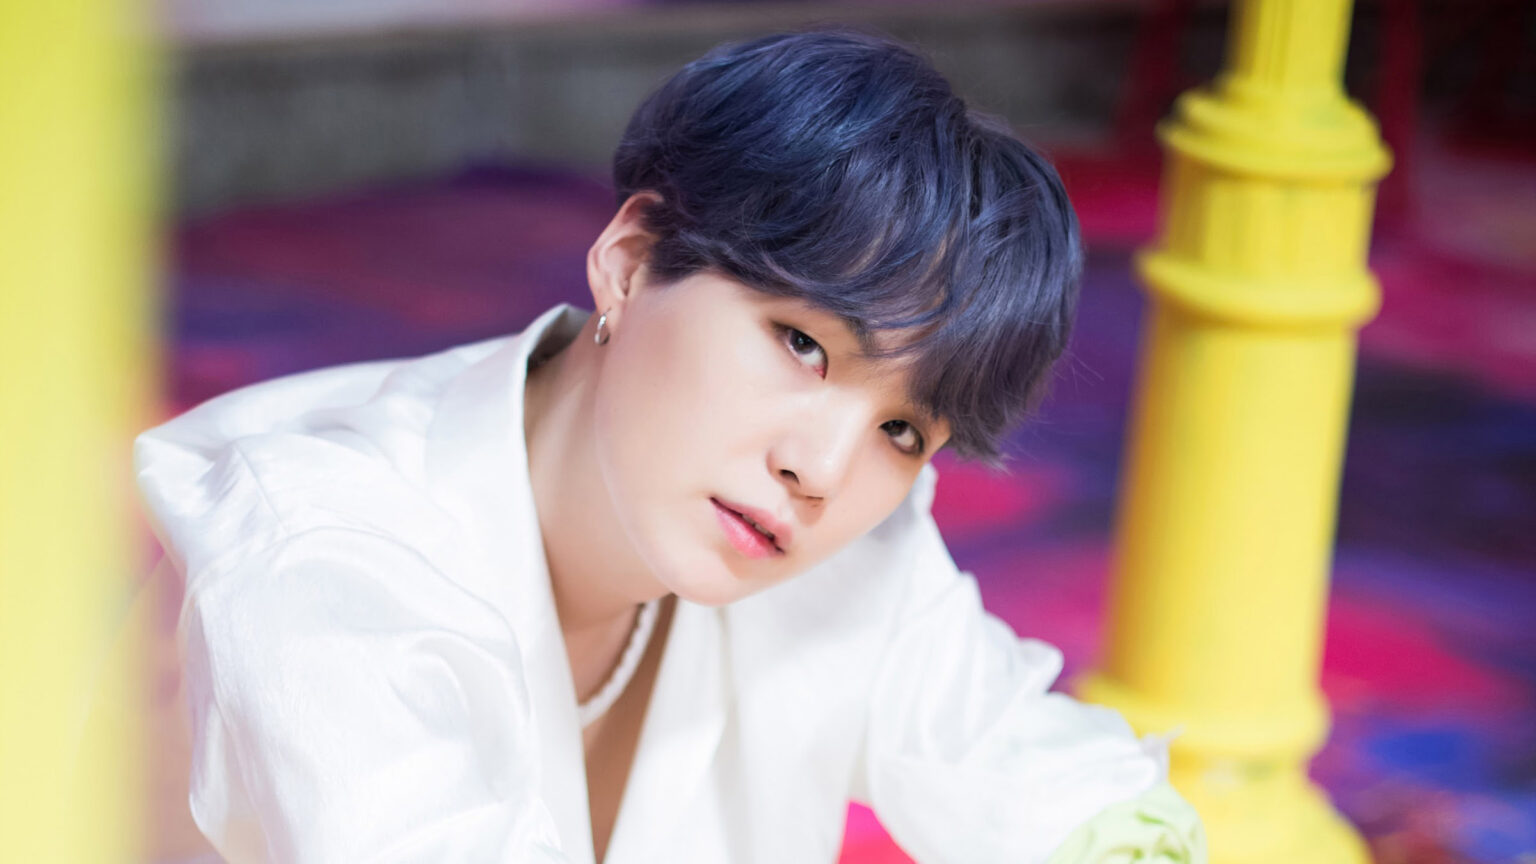 Do you stan Suga from BTS? What's your favorite Suga pic? Check out all of Suga's best lewks and how they make Twitter explode.